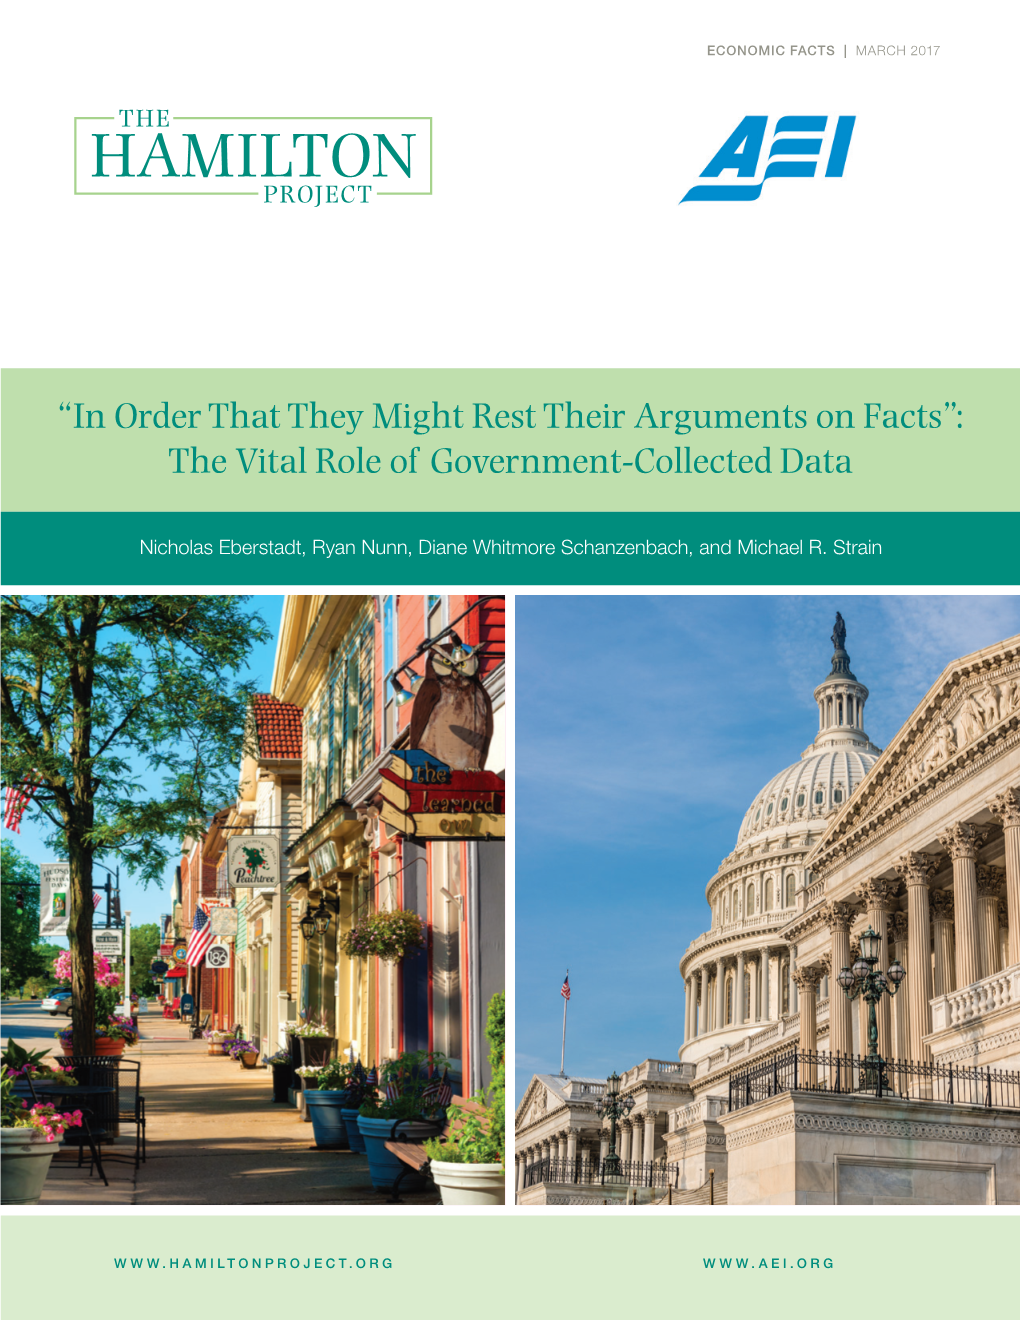 The Vital Role of Government-Collected Data